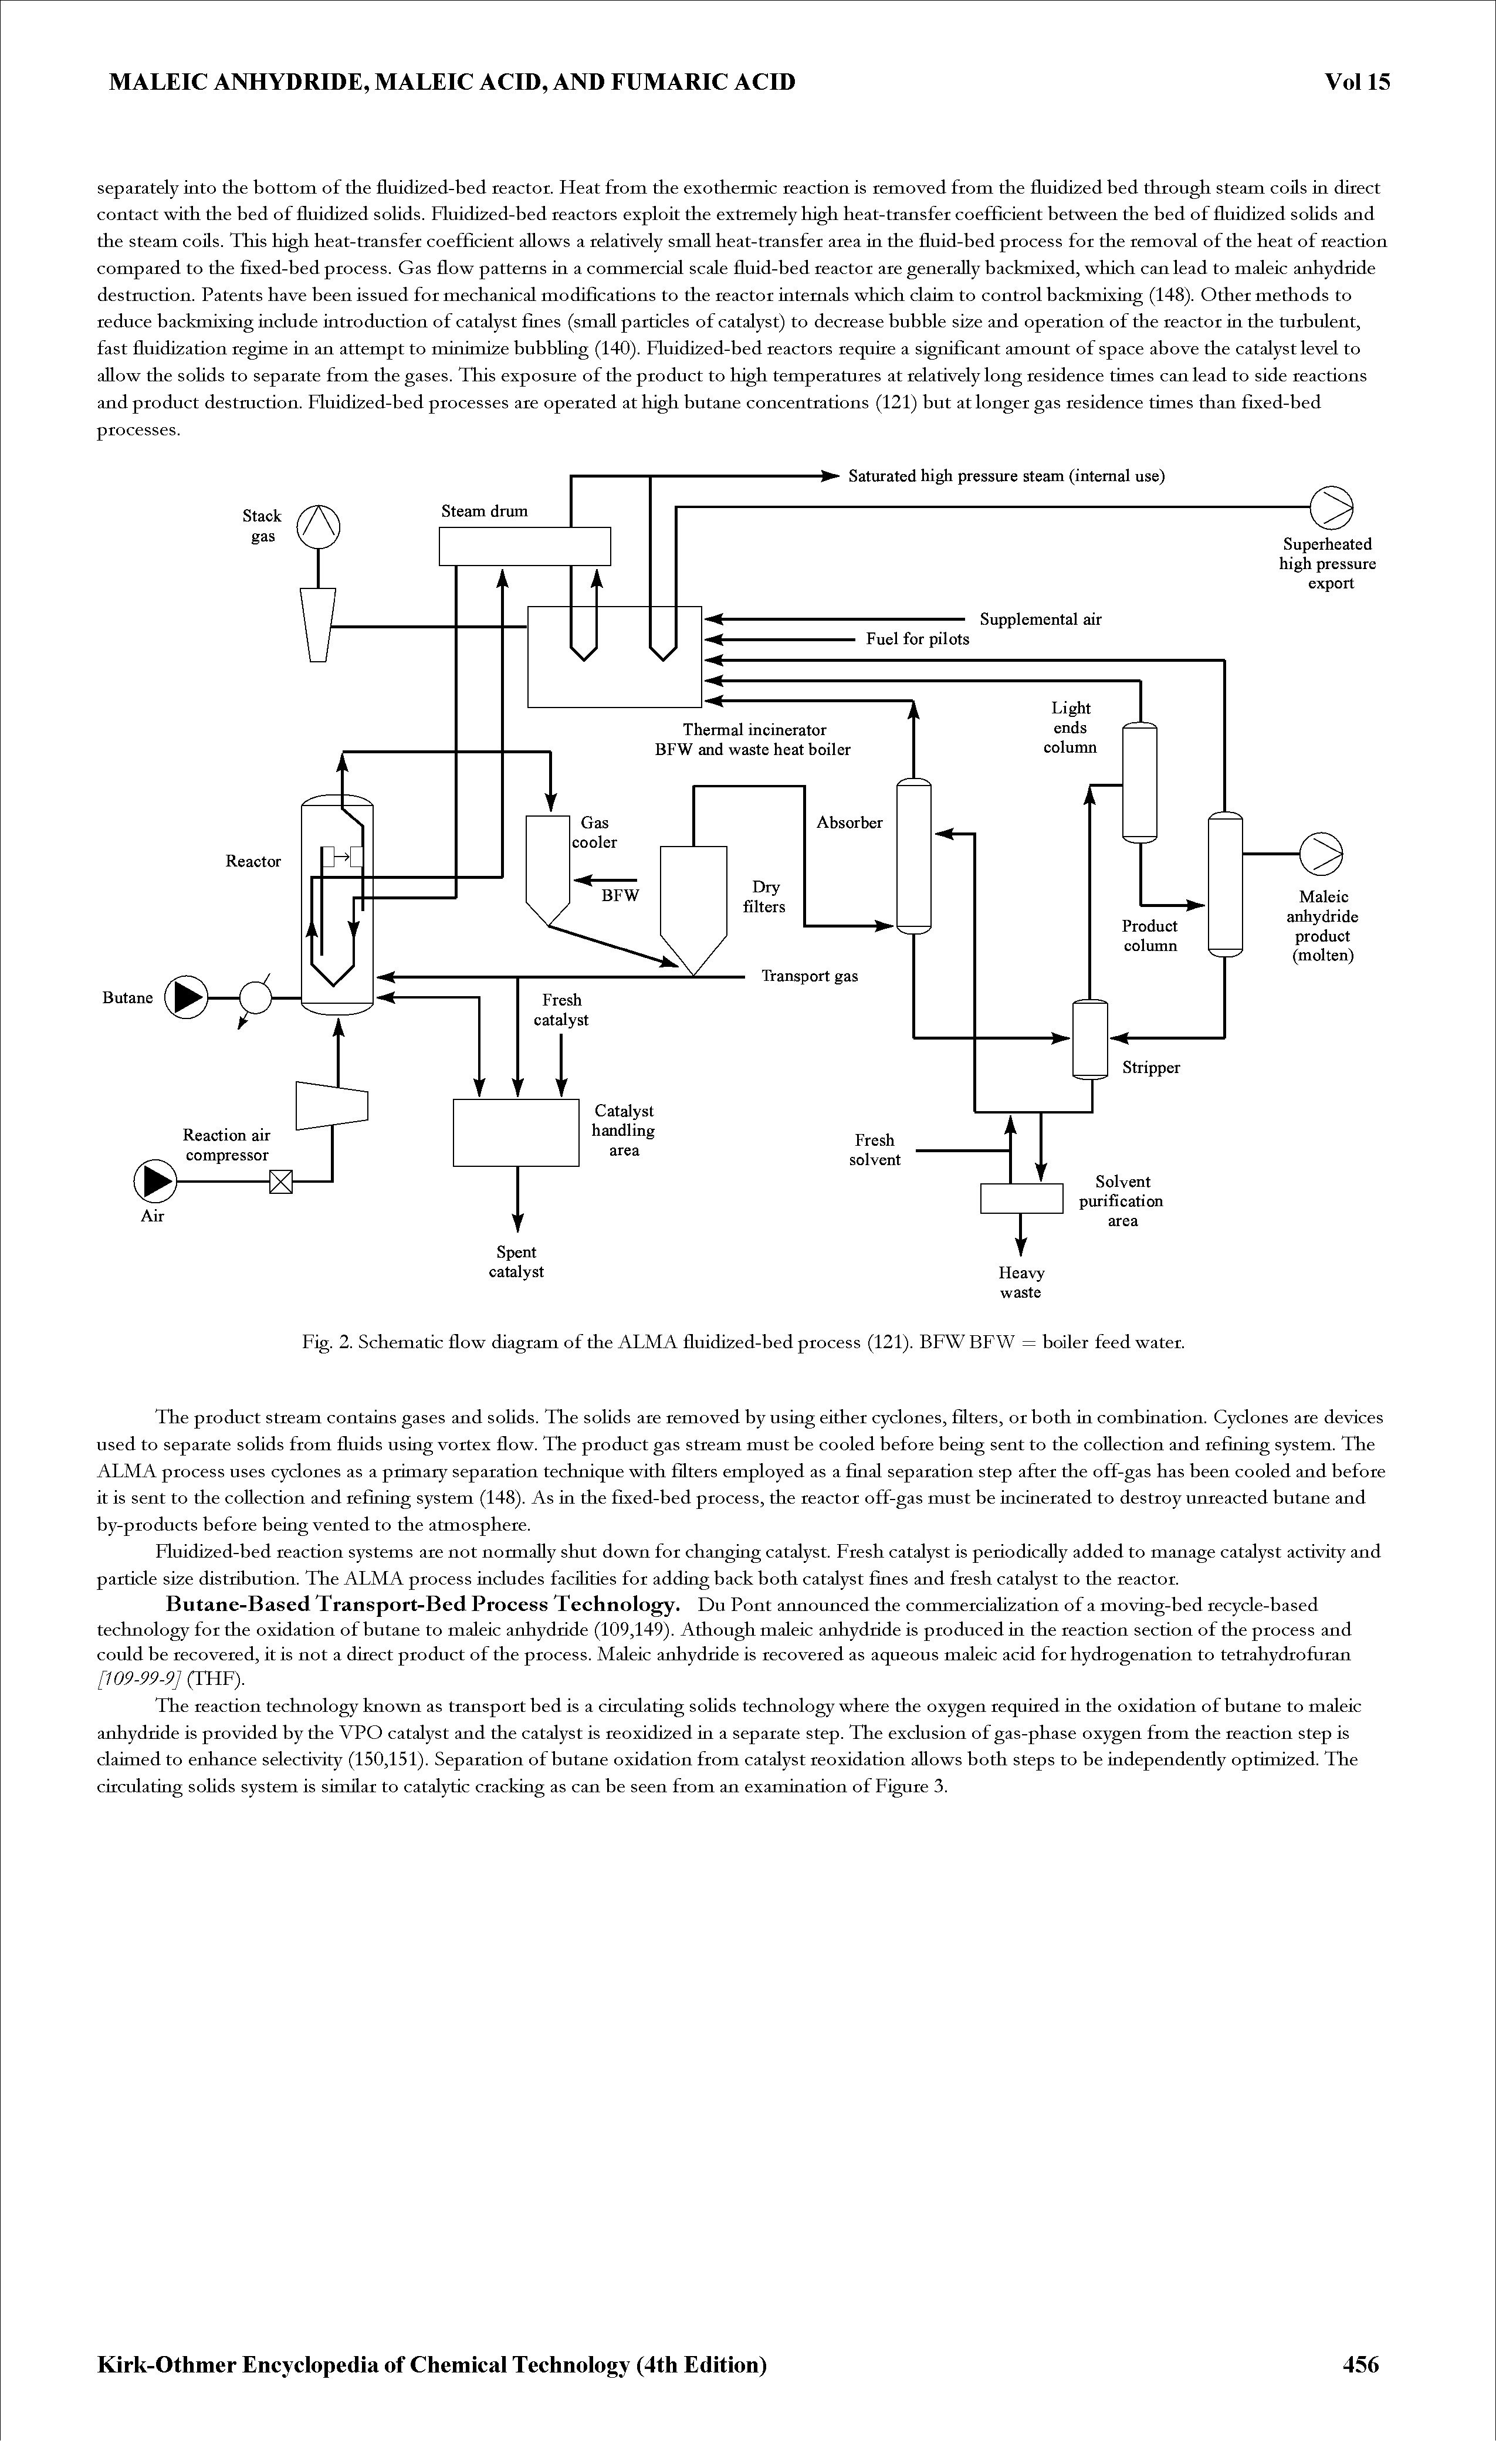 Fig. 2. Schematic flow diagram of the ALMA fluidized-bed process (121). BFW BFW = boiler feed water.